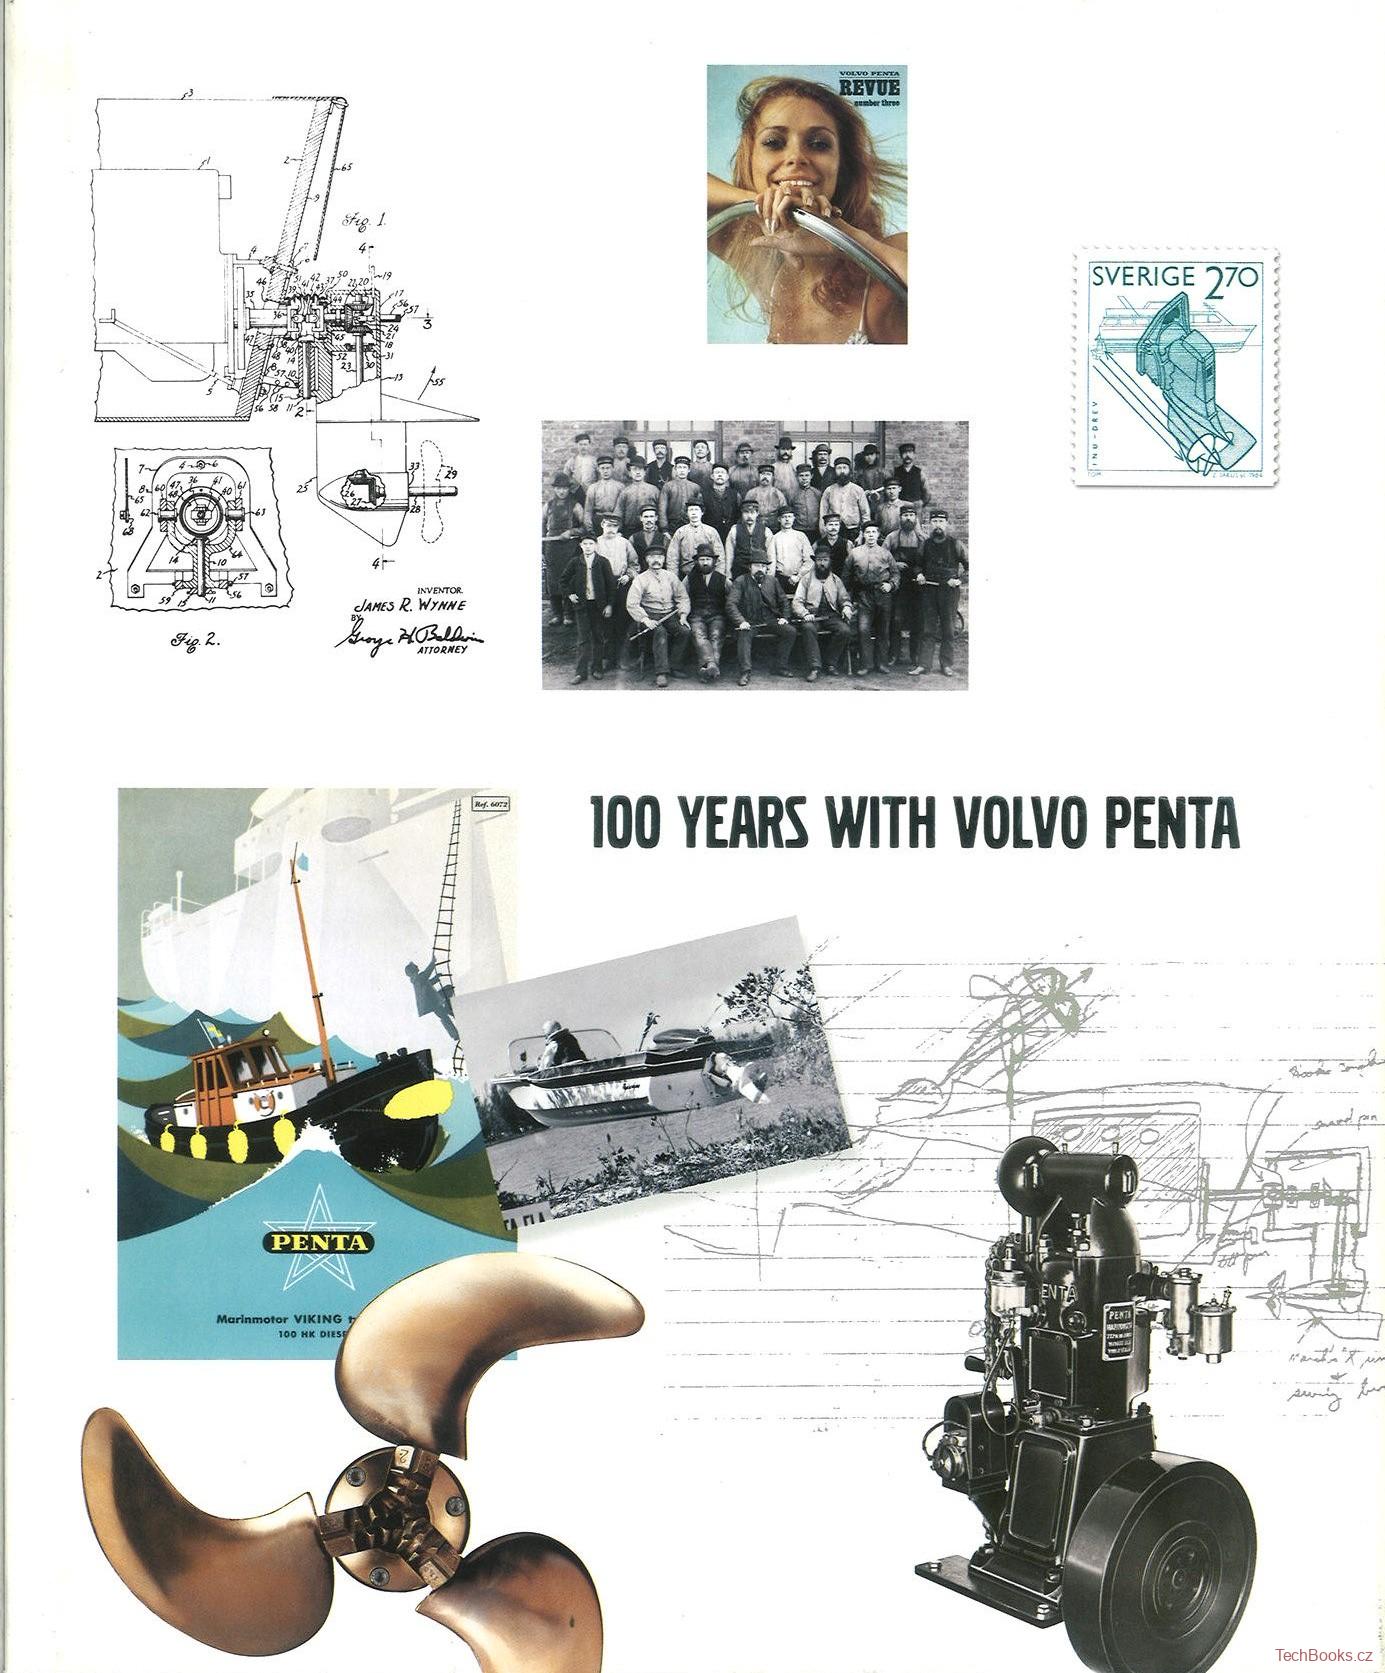 100 years with Volvo Penta